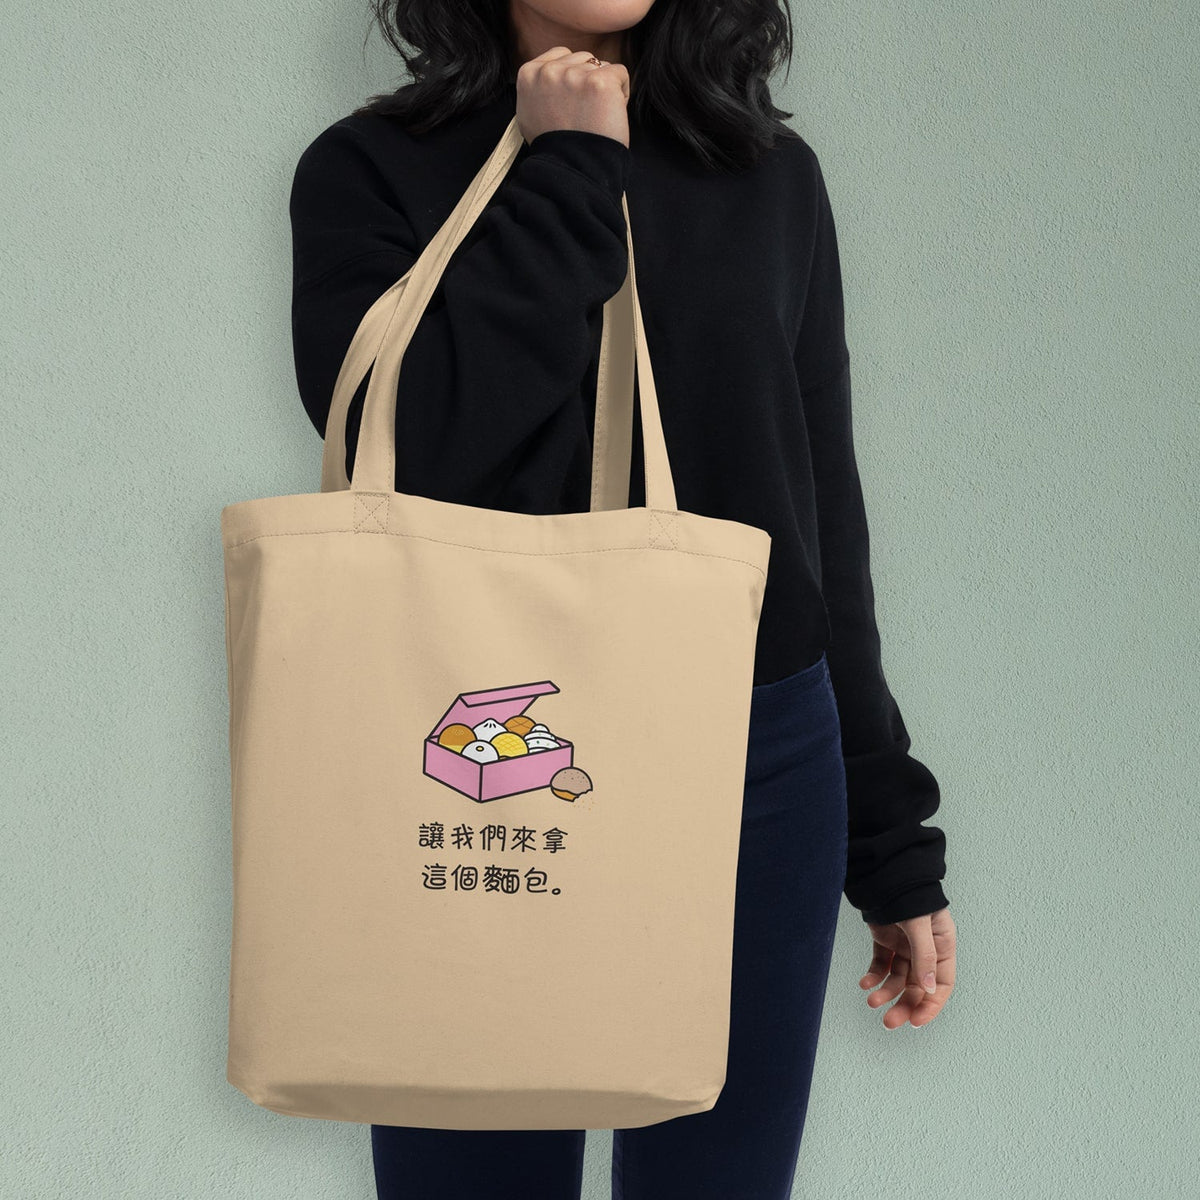 Chinese Bakery Tote Bag Cantonese Bag Bread Lover Chinese 